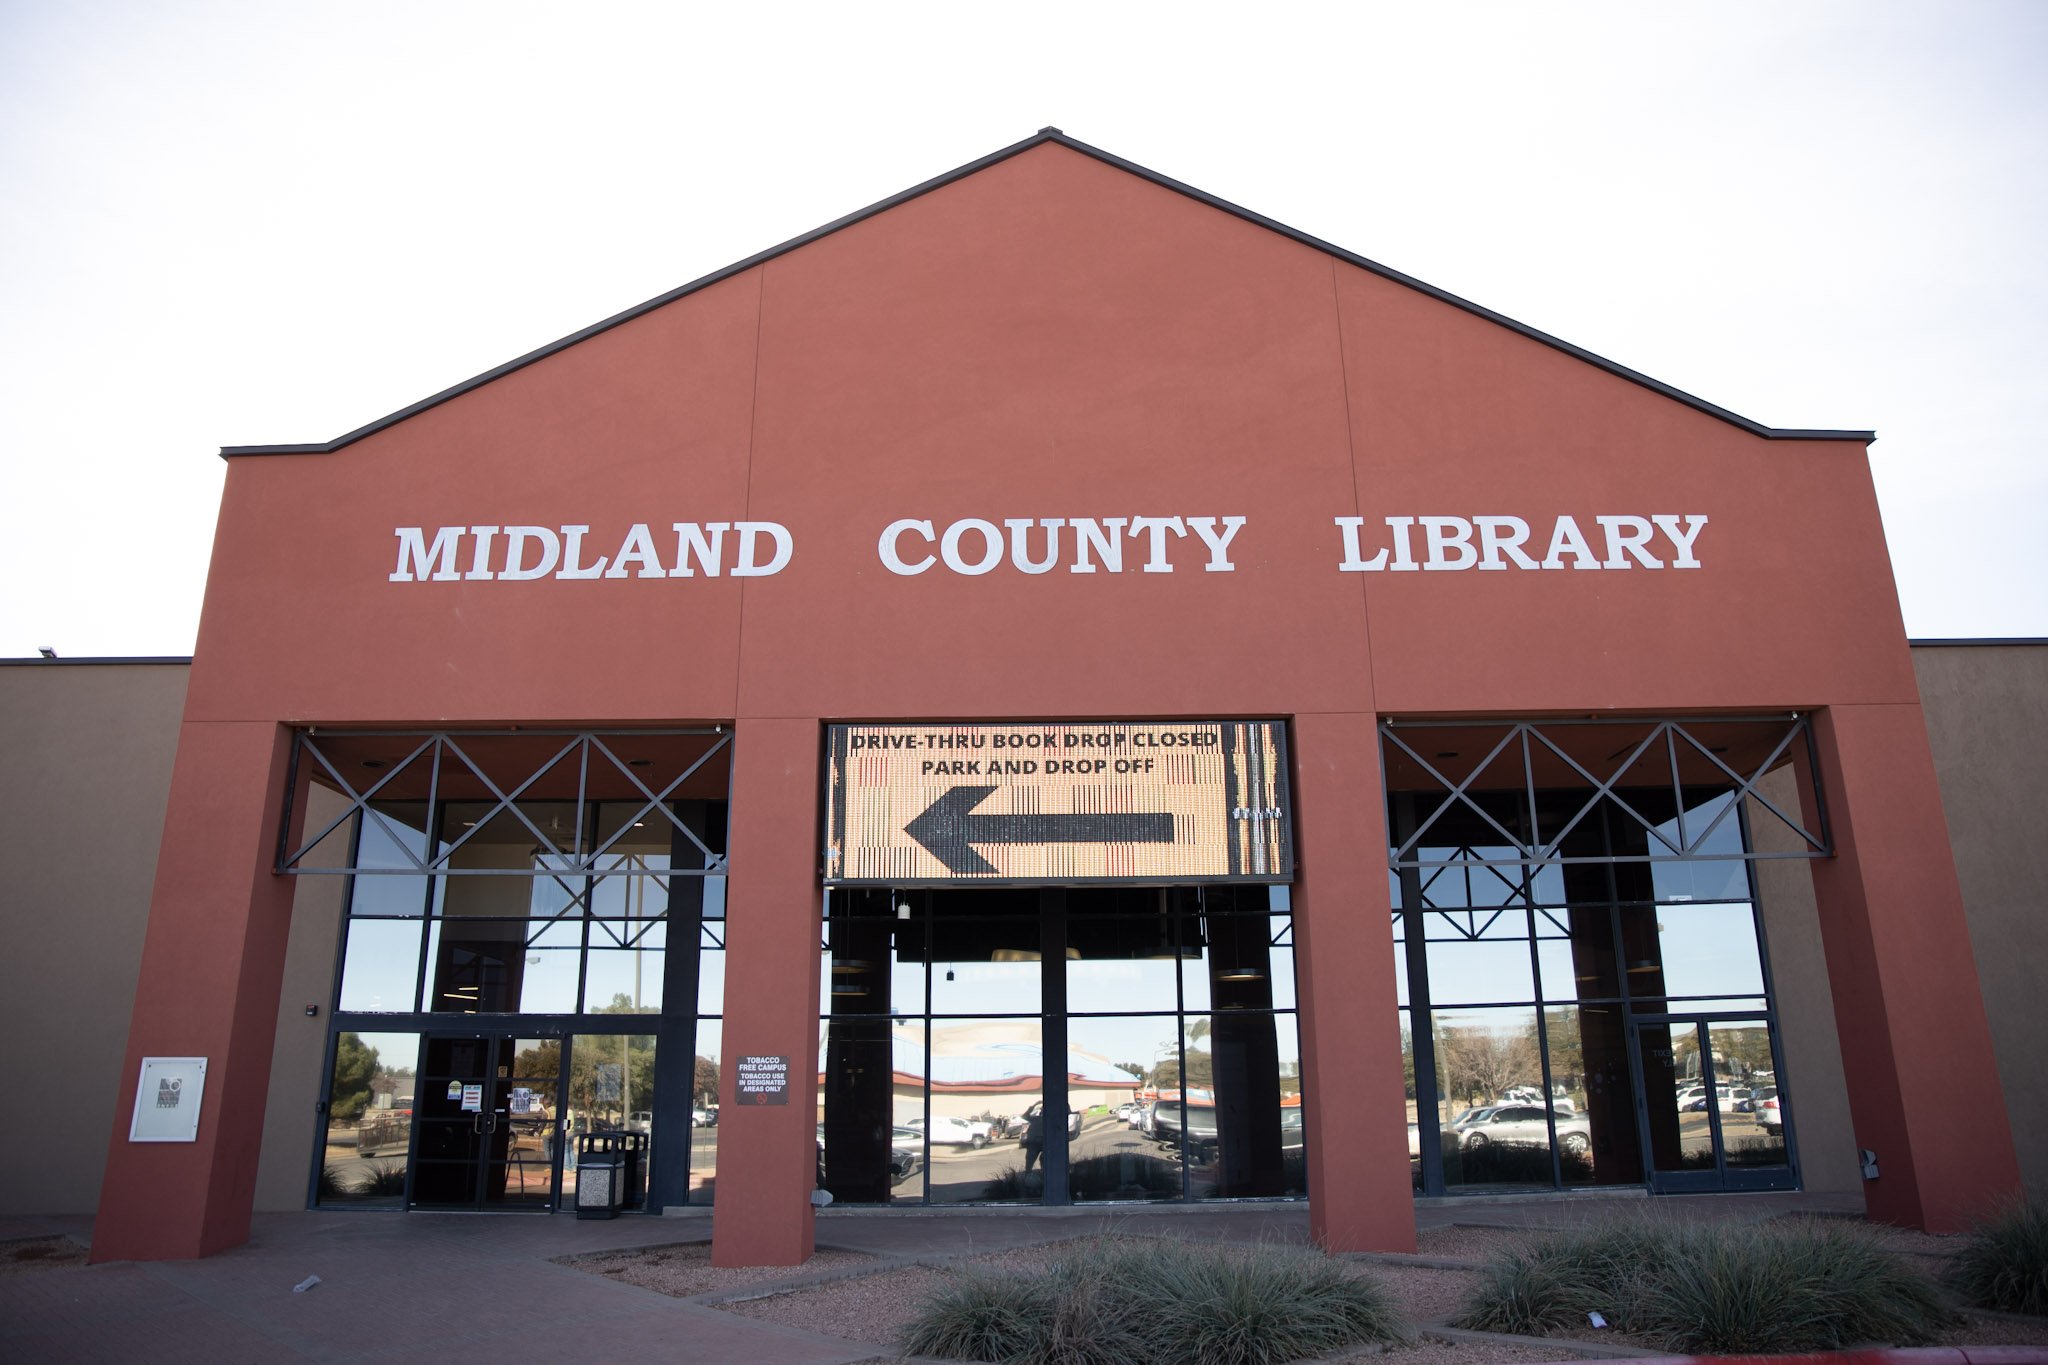 Centennial Library building in Midland